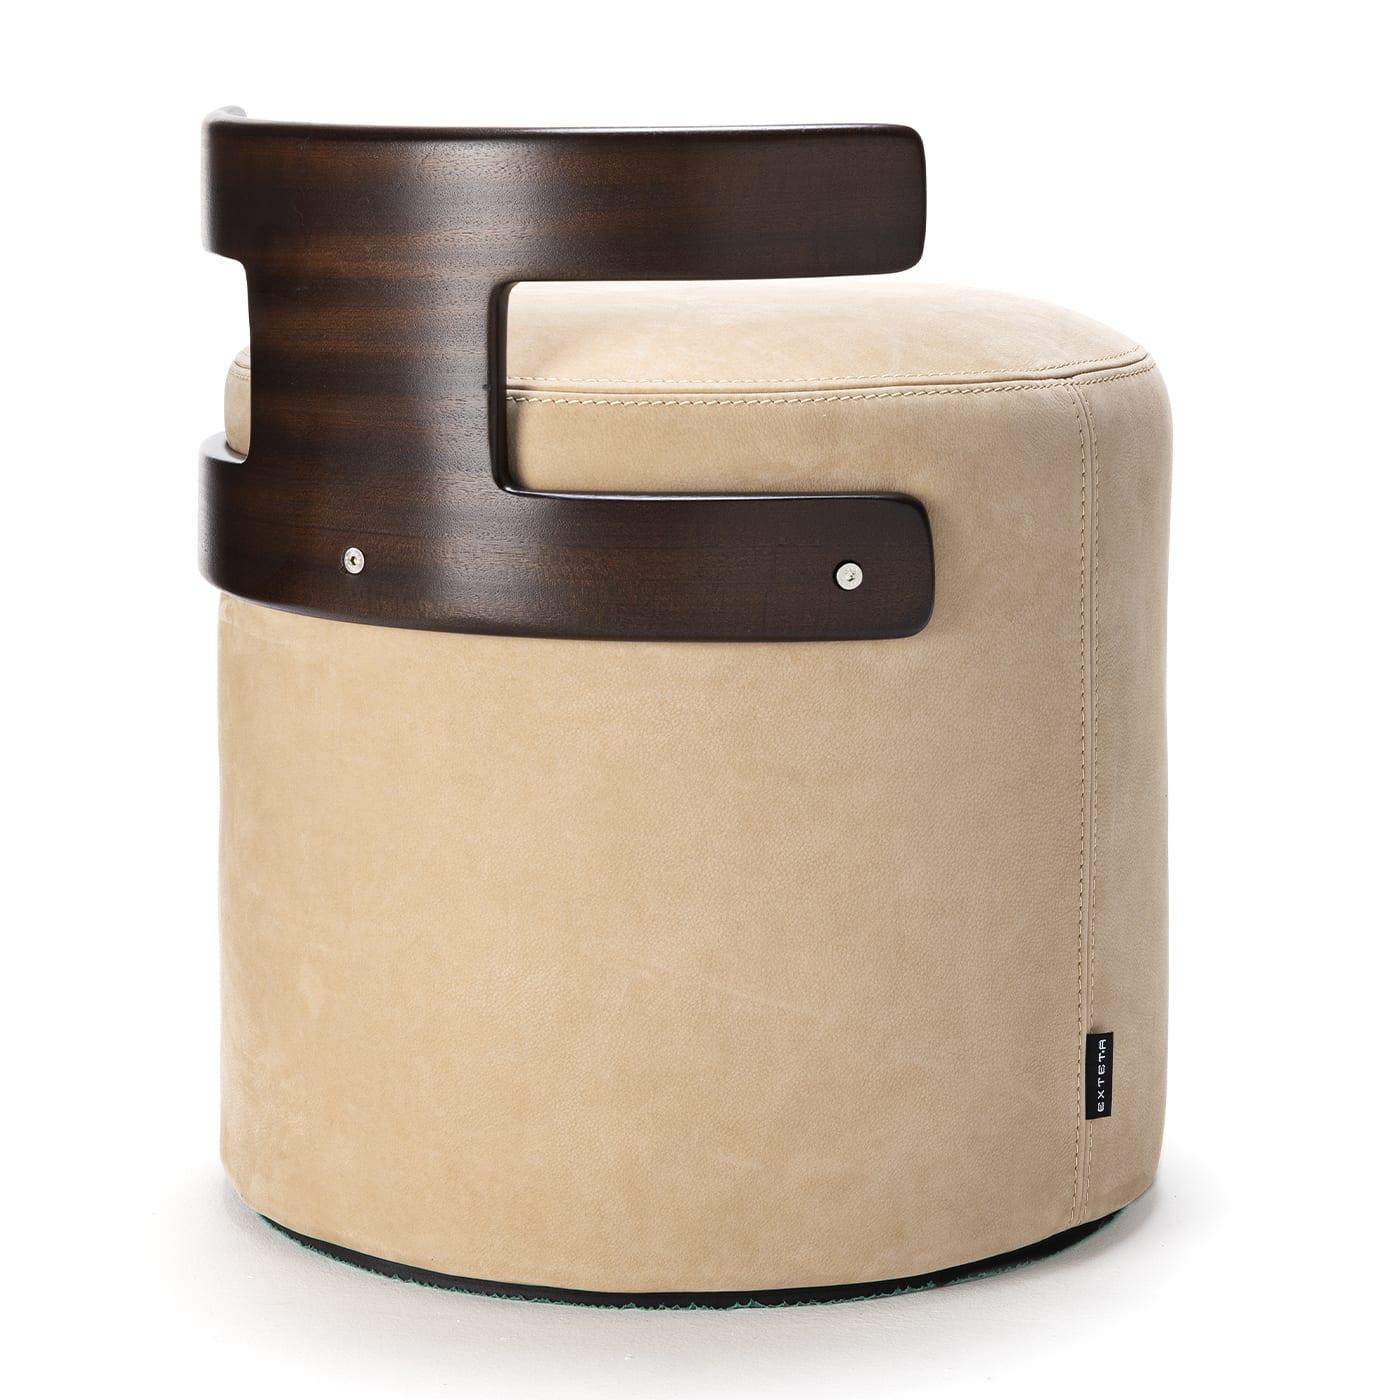 A softly padded cylindrical seat makes up the gorgeous design of this innovative pouf by Massimo Castagna, supported with a sleek mahogany backrest boasting a striking T shape. Upholstered with beige leather with tone-on-tone stitching, this piece